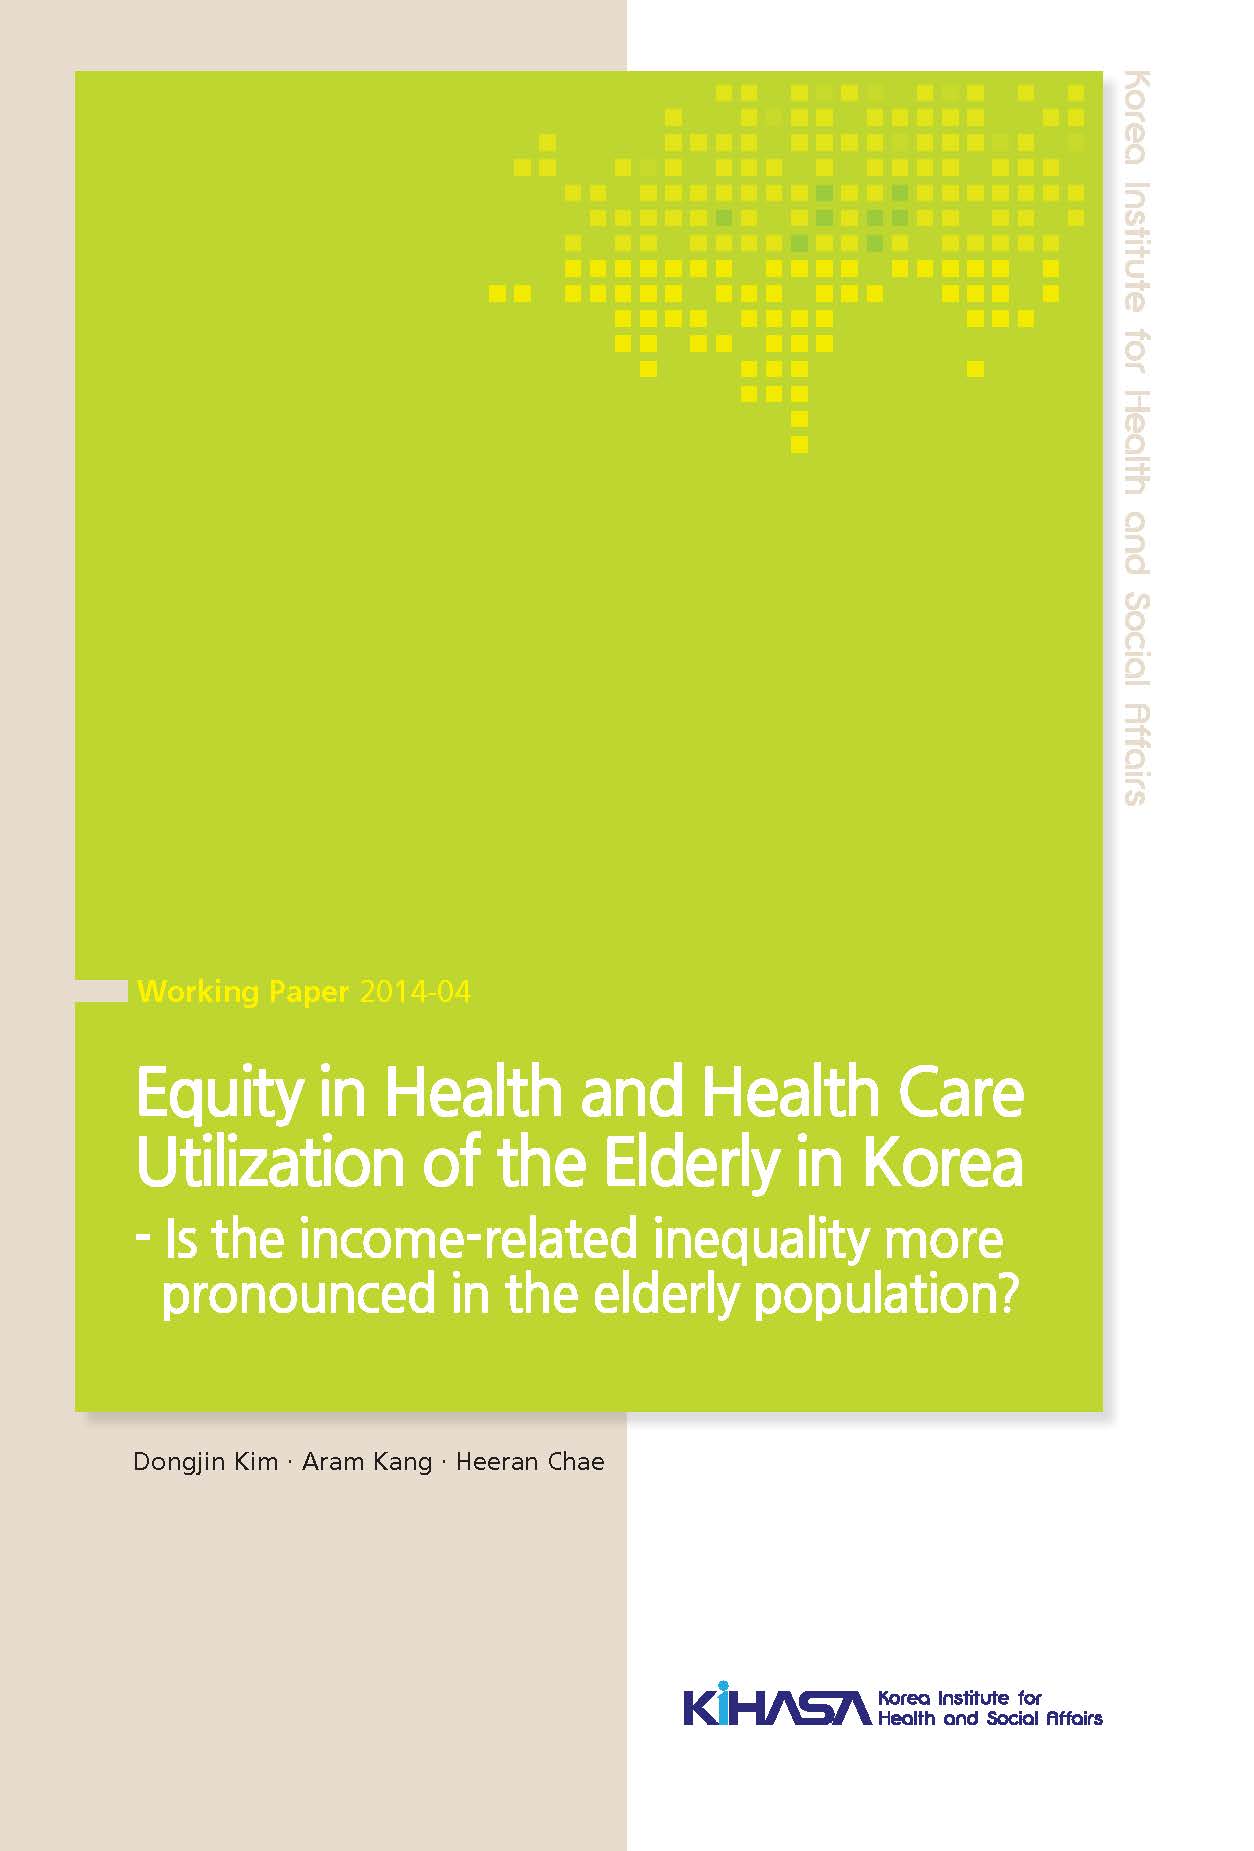 Equity in Health and Health Care Utilization of the Elderly in Korea - Is the income-related inequality more pronounced in the elderly population?